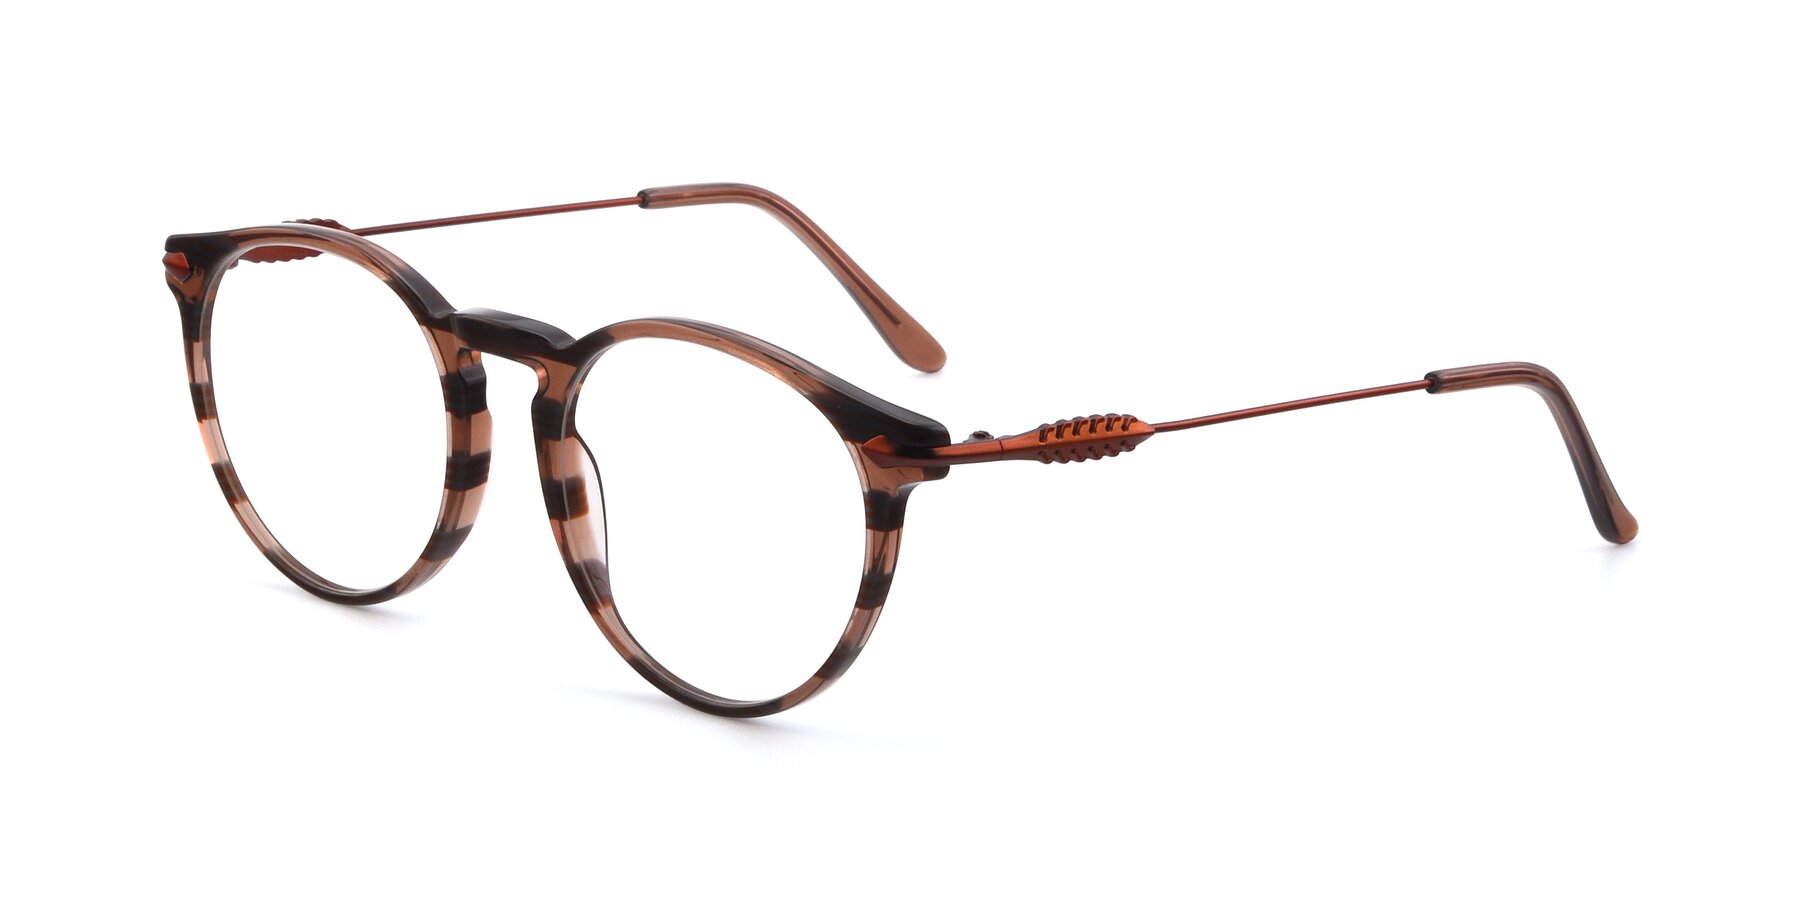 Angle of 17660 in Stripe Brown with Clear Eyeglass Lenses